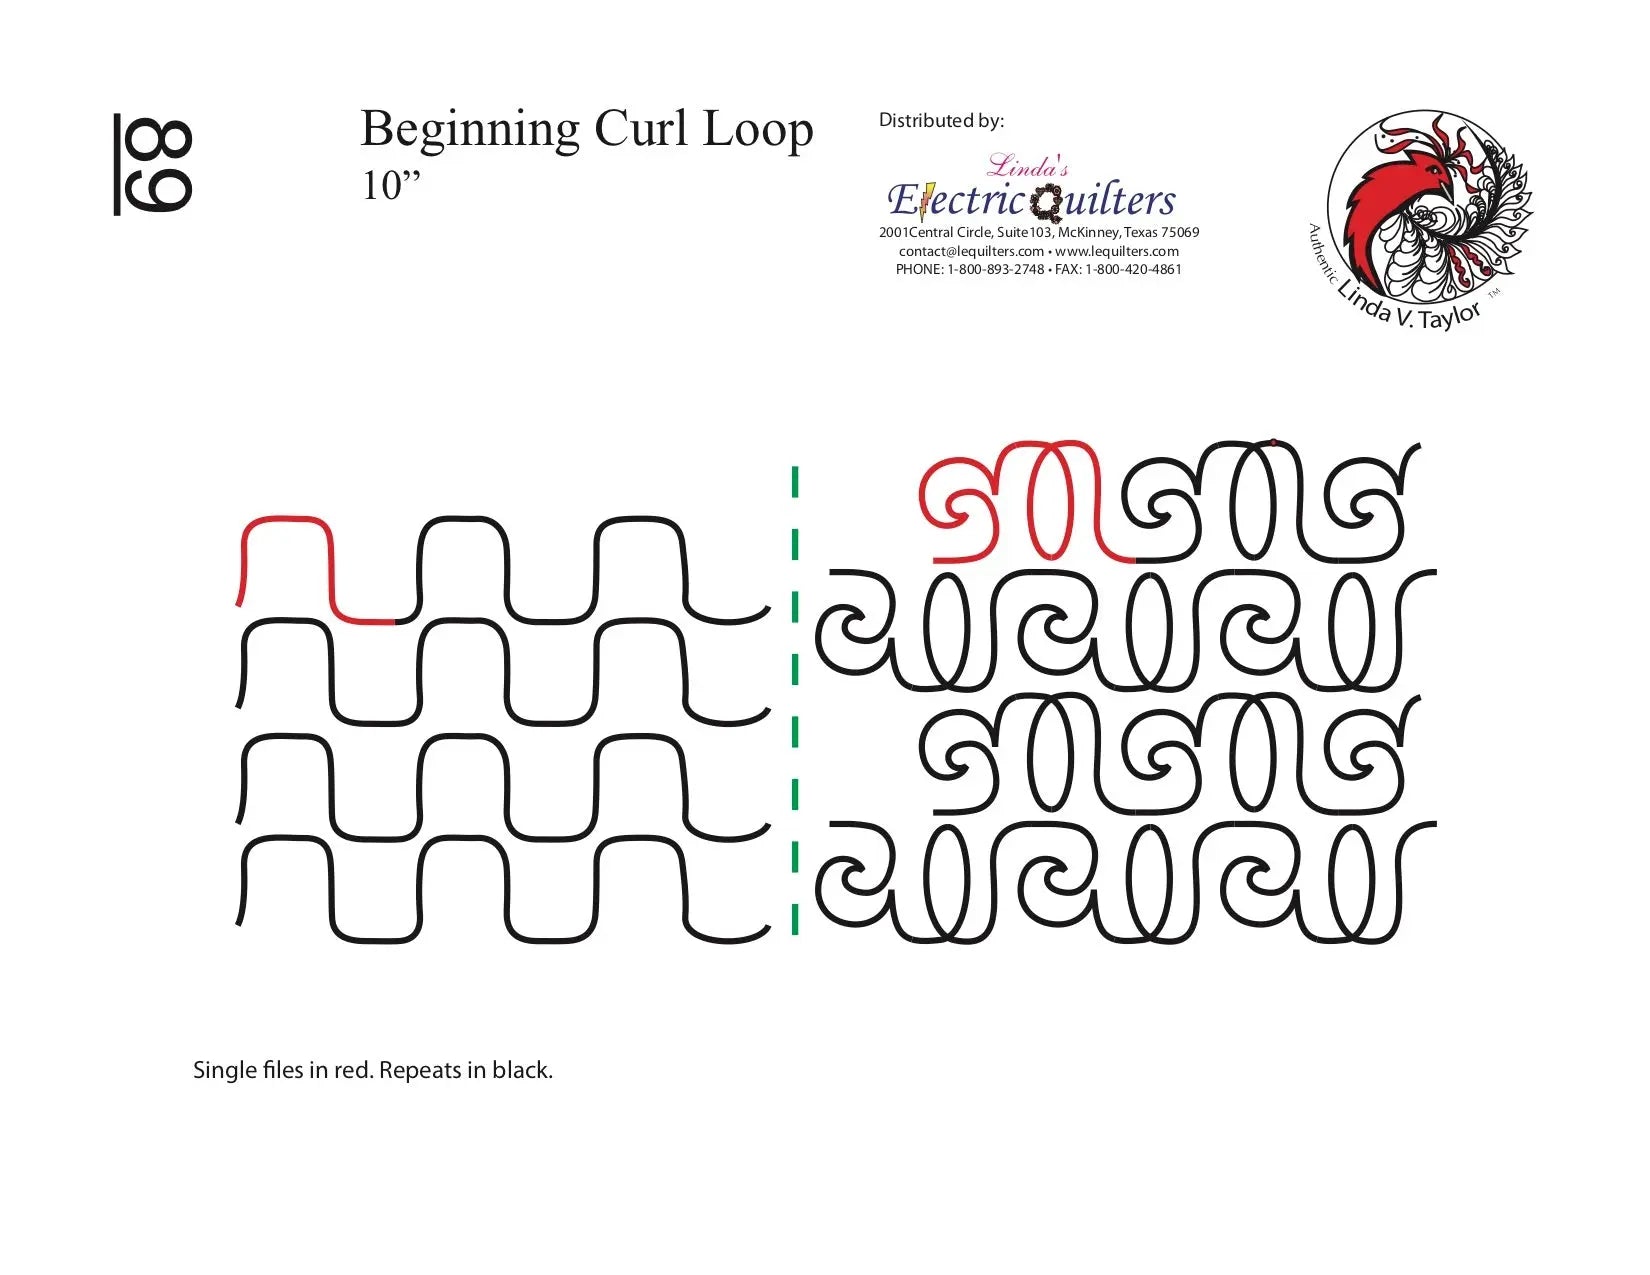 089 Beginning Curl Loop Pantograph by Linda V. Taylor - Linda's Electric Quilters